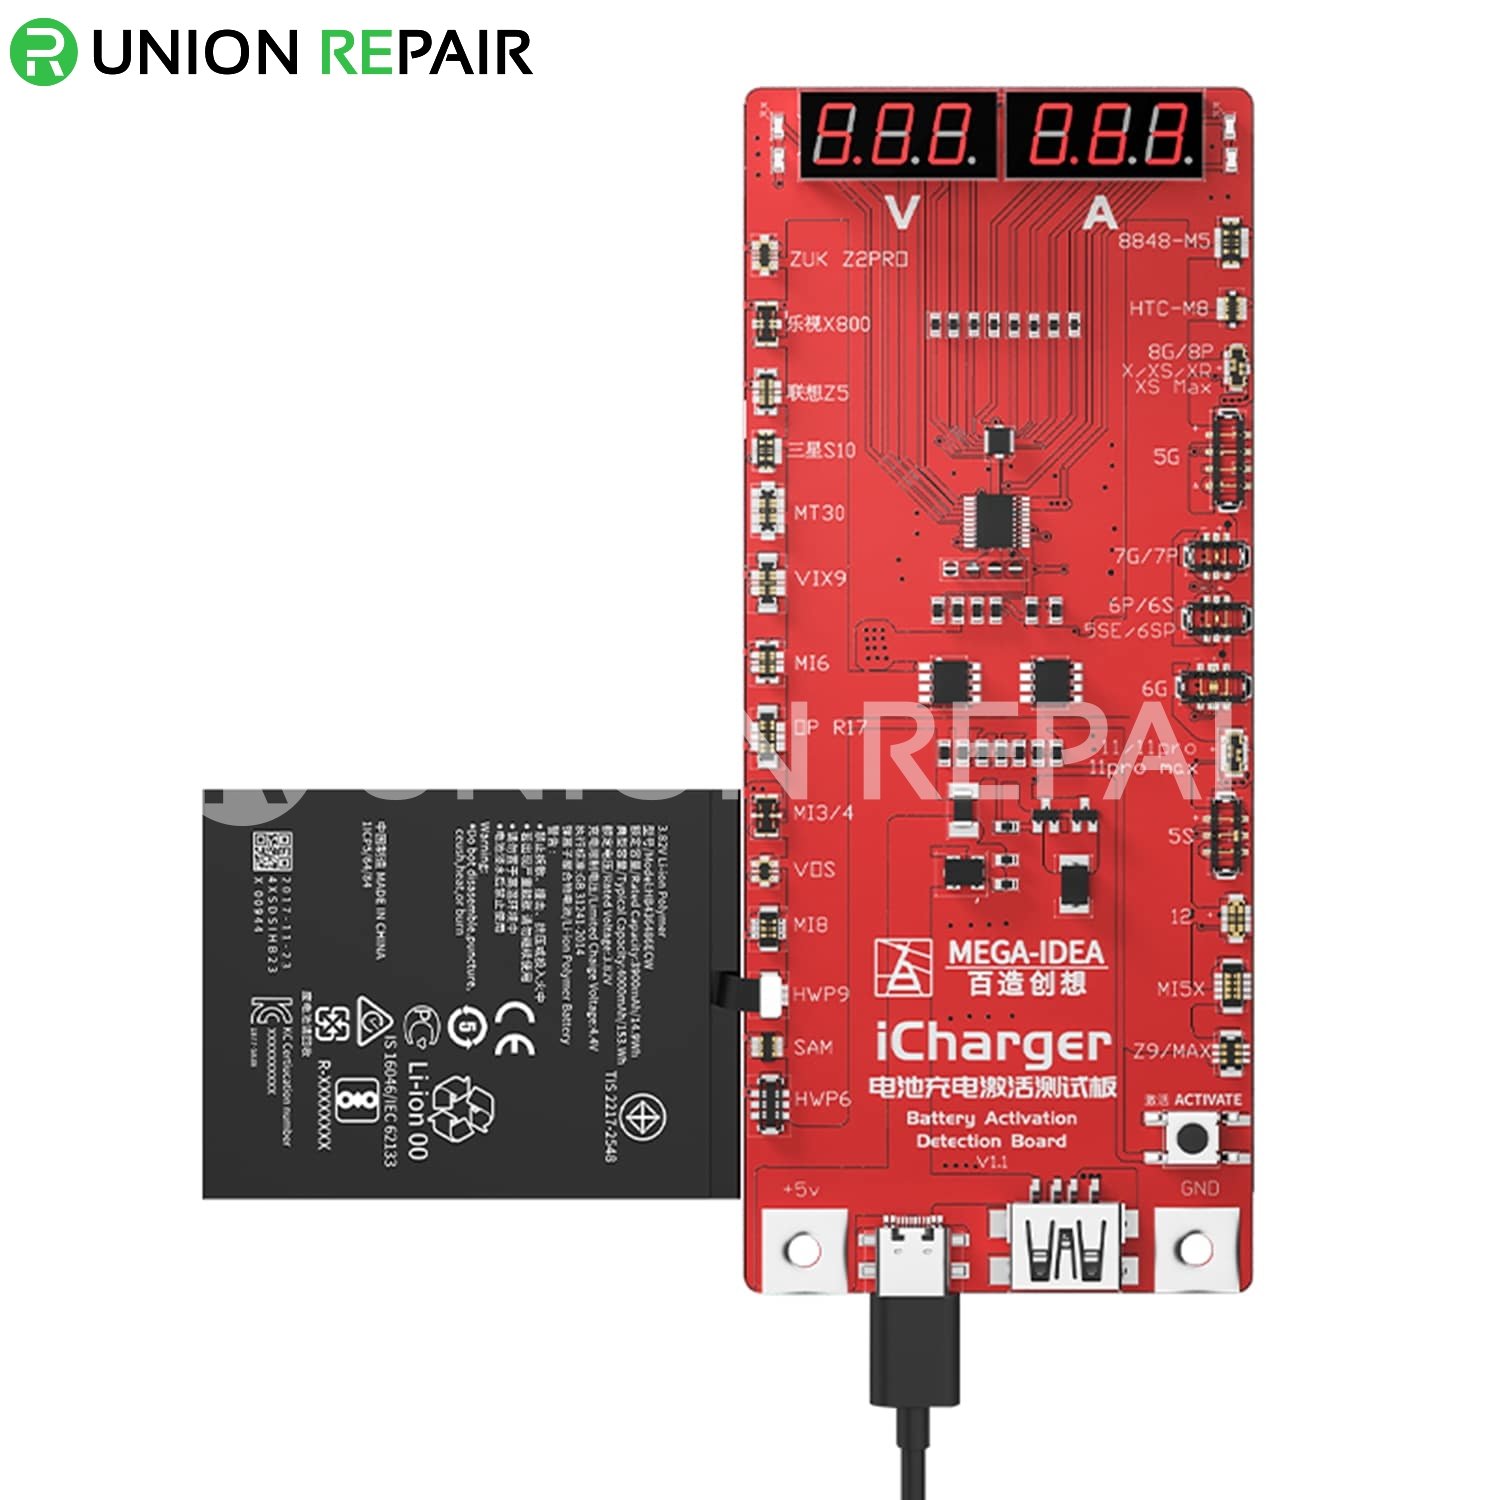 Battery Activation Detection Board QIANLI MEGA-IDEA iCharger 2.0 quick charging with For iPhone 12 Android phone battery Repair